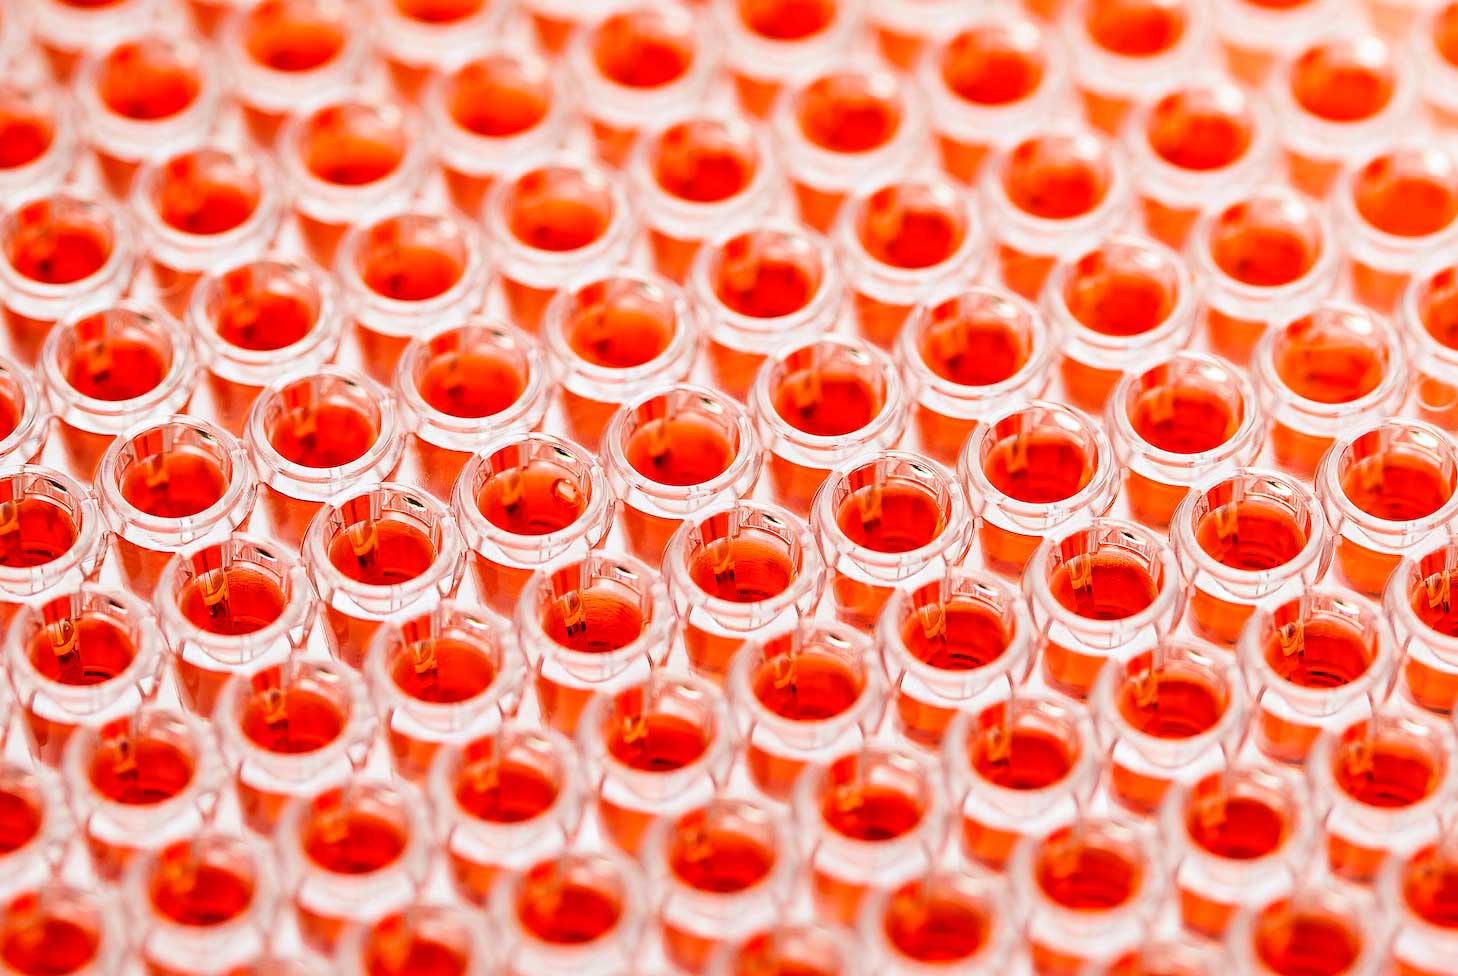 Phenotypic screening means exciting times for drug discovery 5463402397